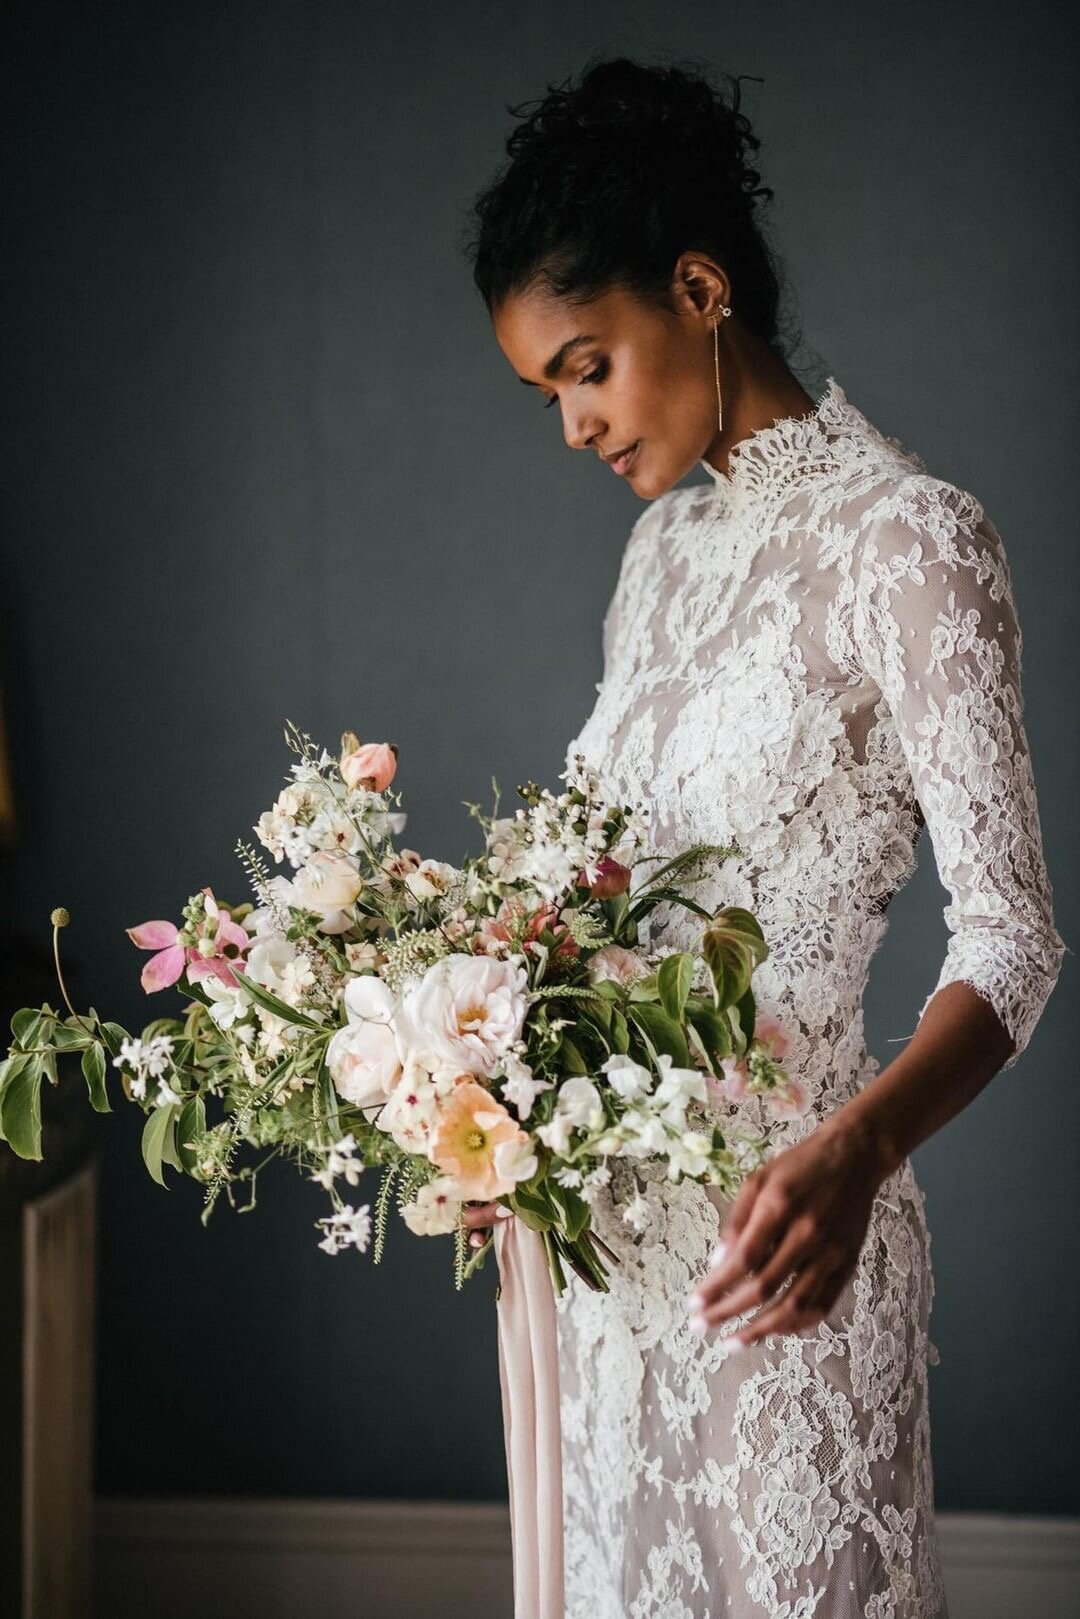 Nadia Araujo with her bridal bouquet